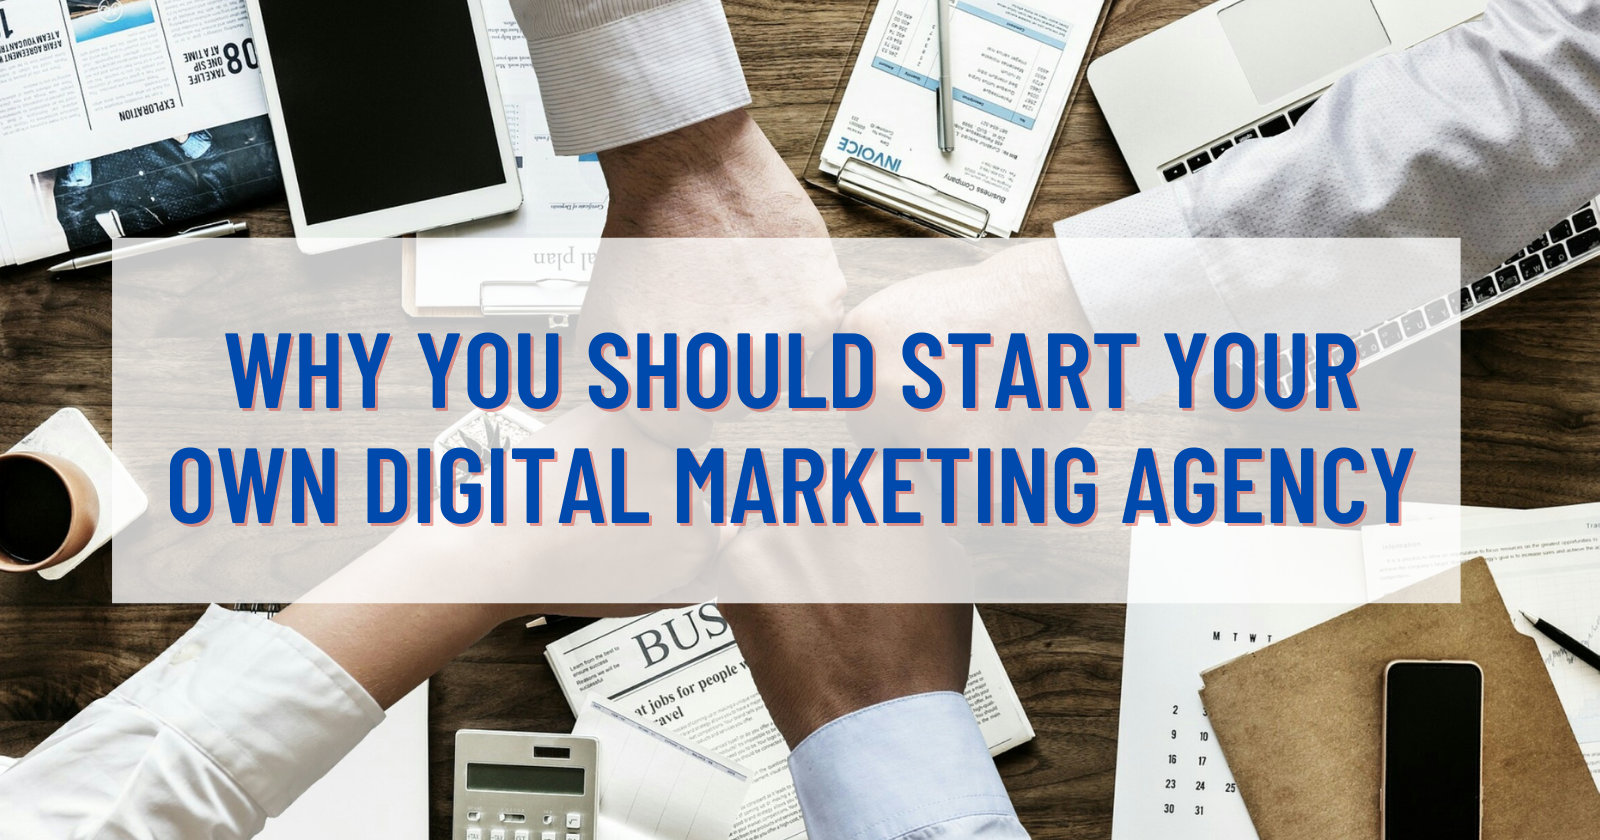 how to start a digital marketing agency from scratch